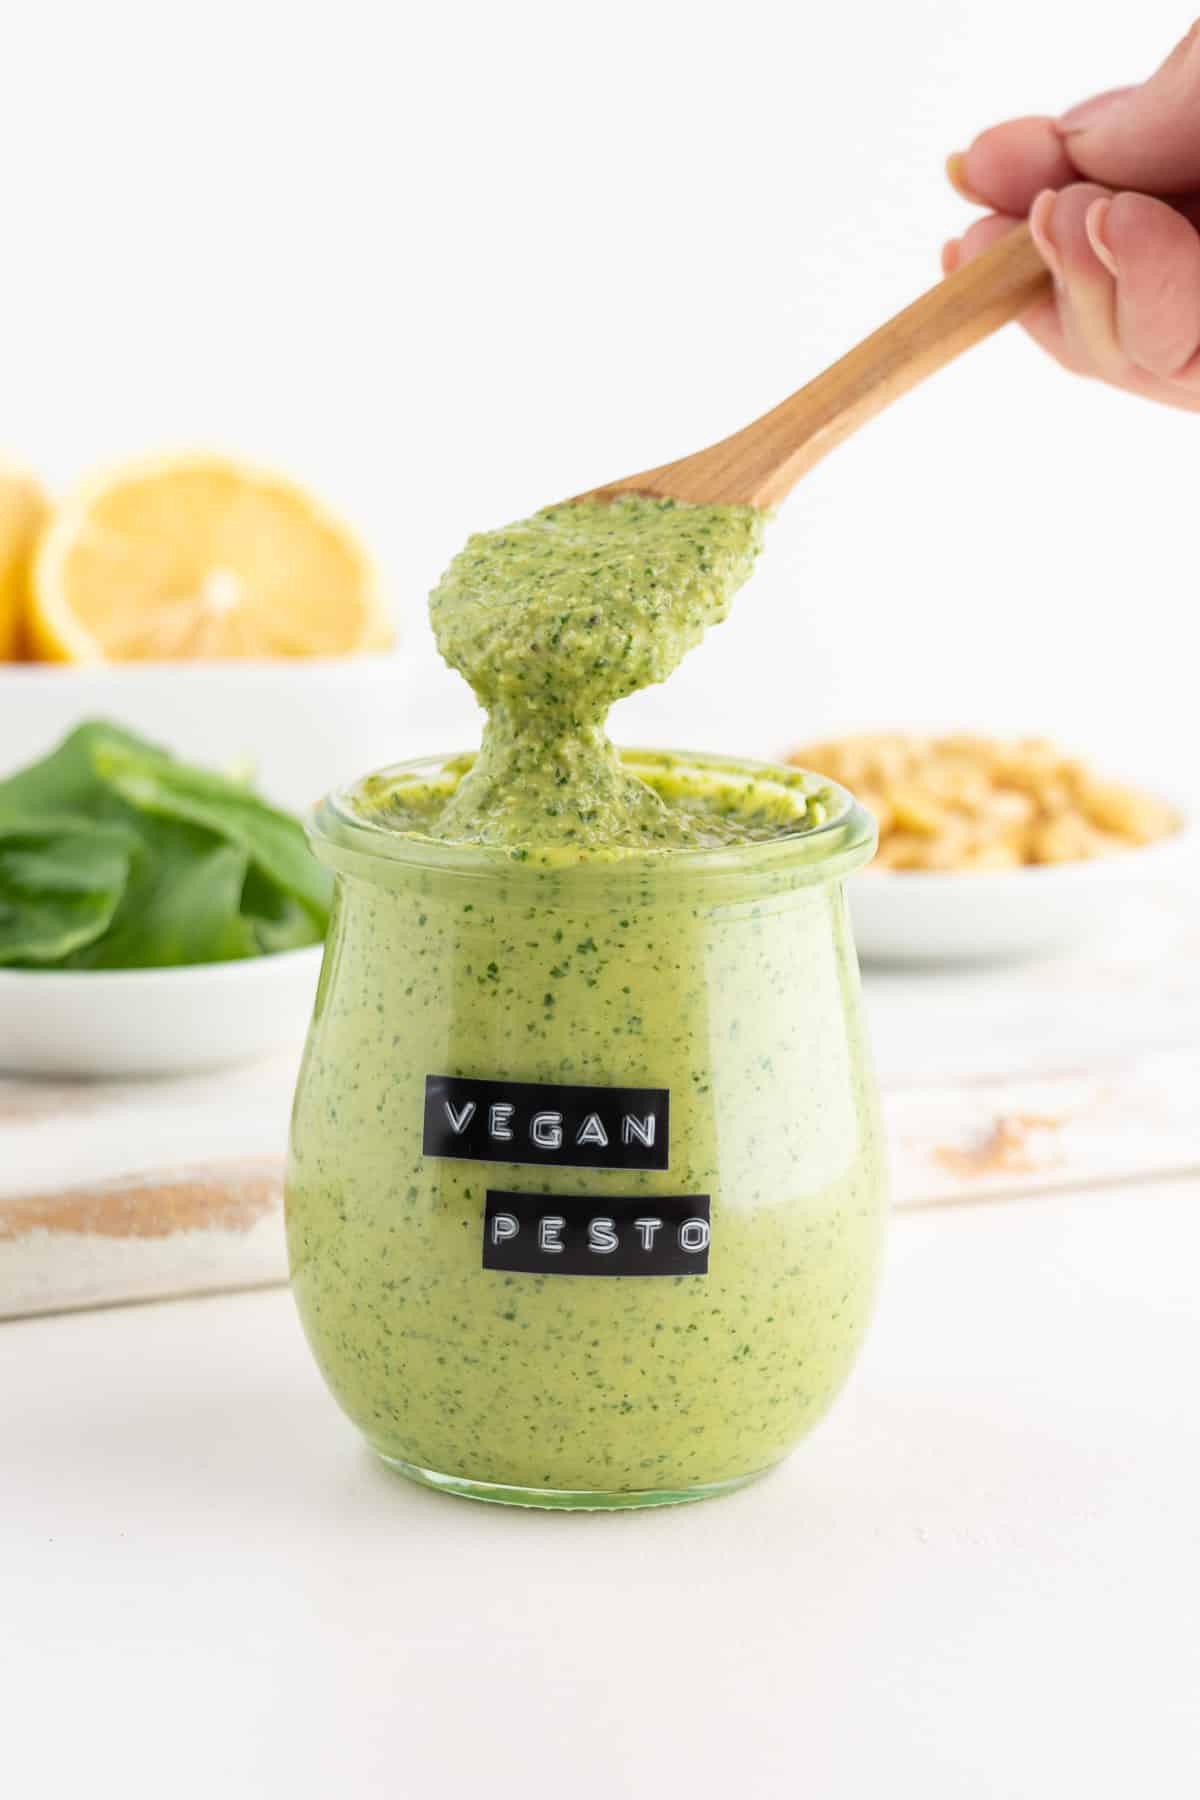 wooden spoon scooping vegan pesto out of a glass jar surrounded by lemons, basil, and pine nuts